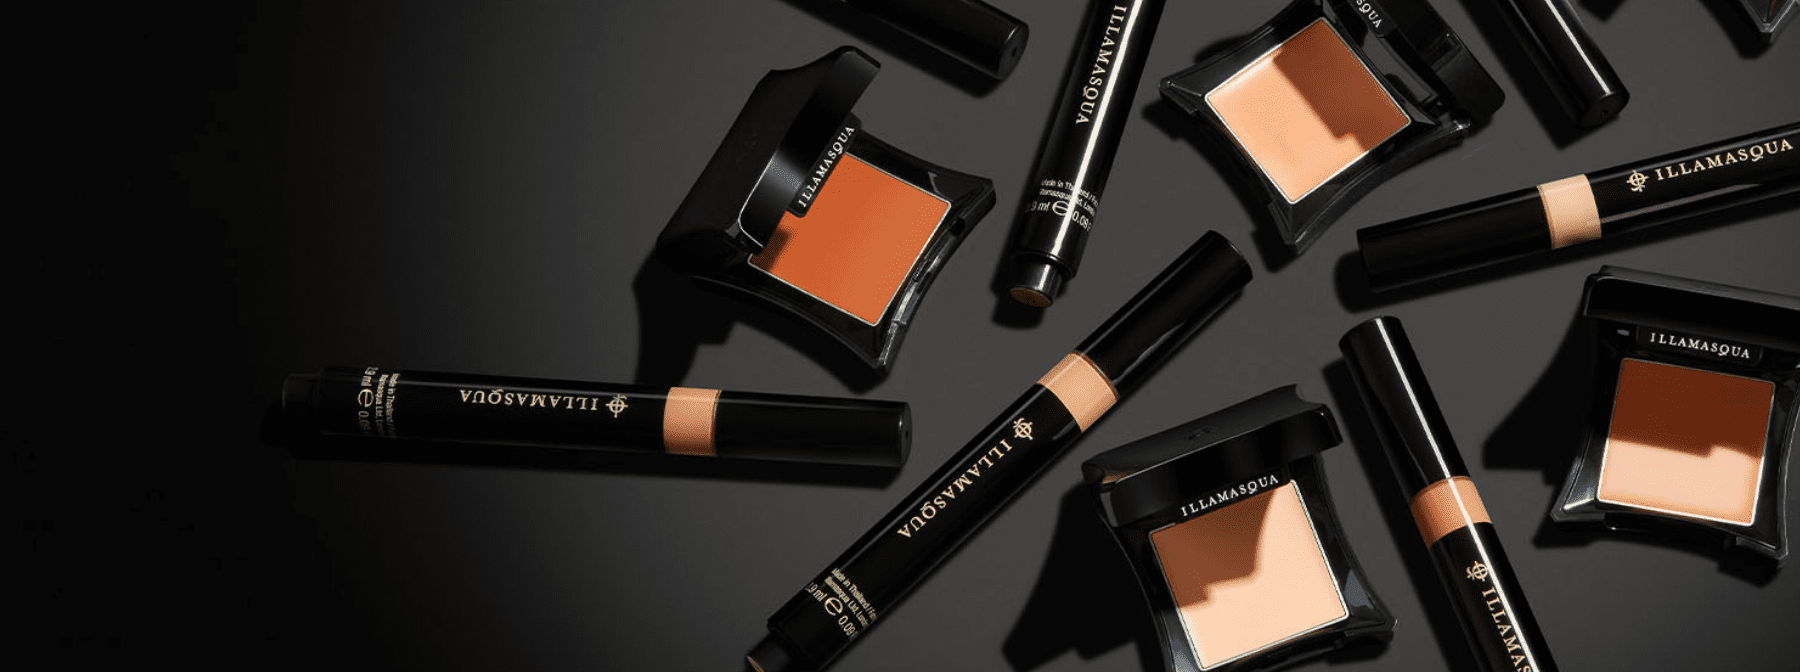 BLACK FRIDAY BEAUTY DEALS: 6 PRO TIPS FOR OUR BESTSELLERS